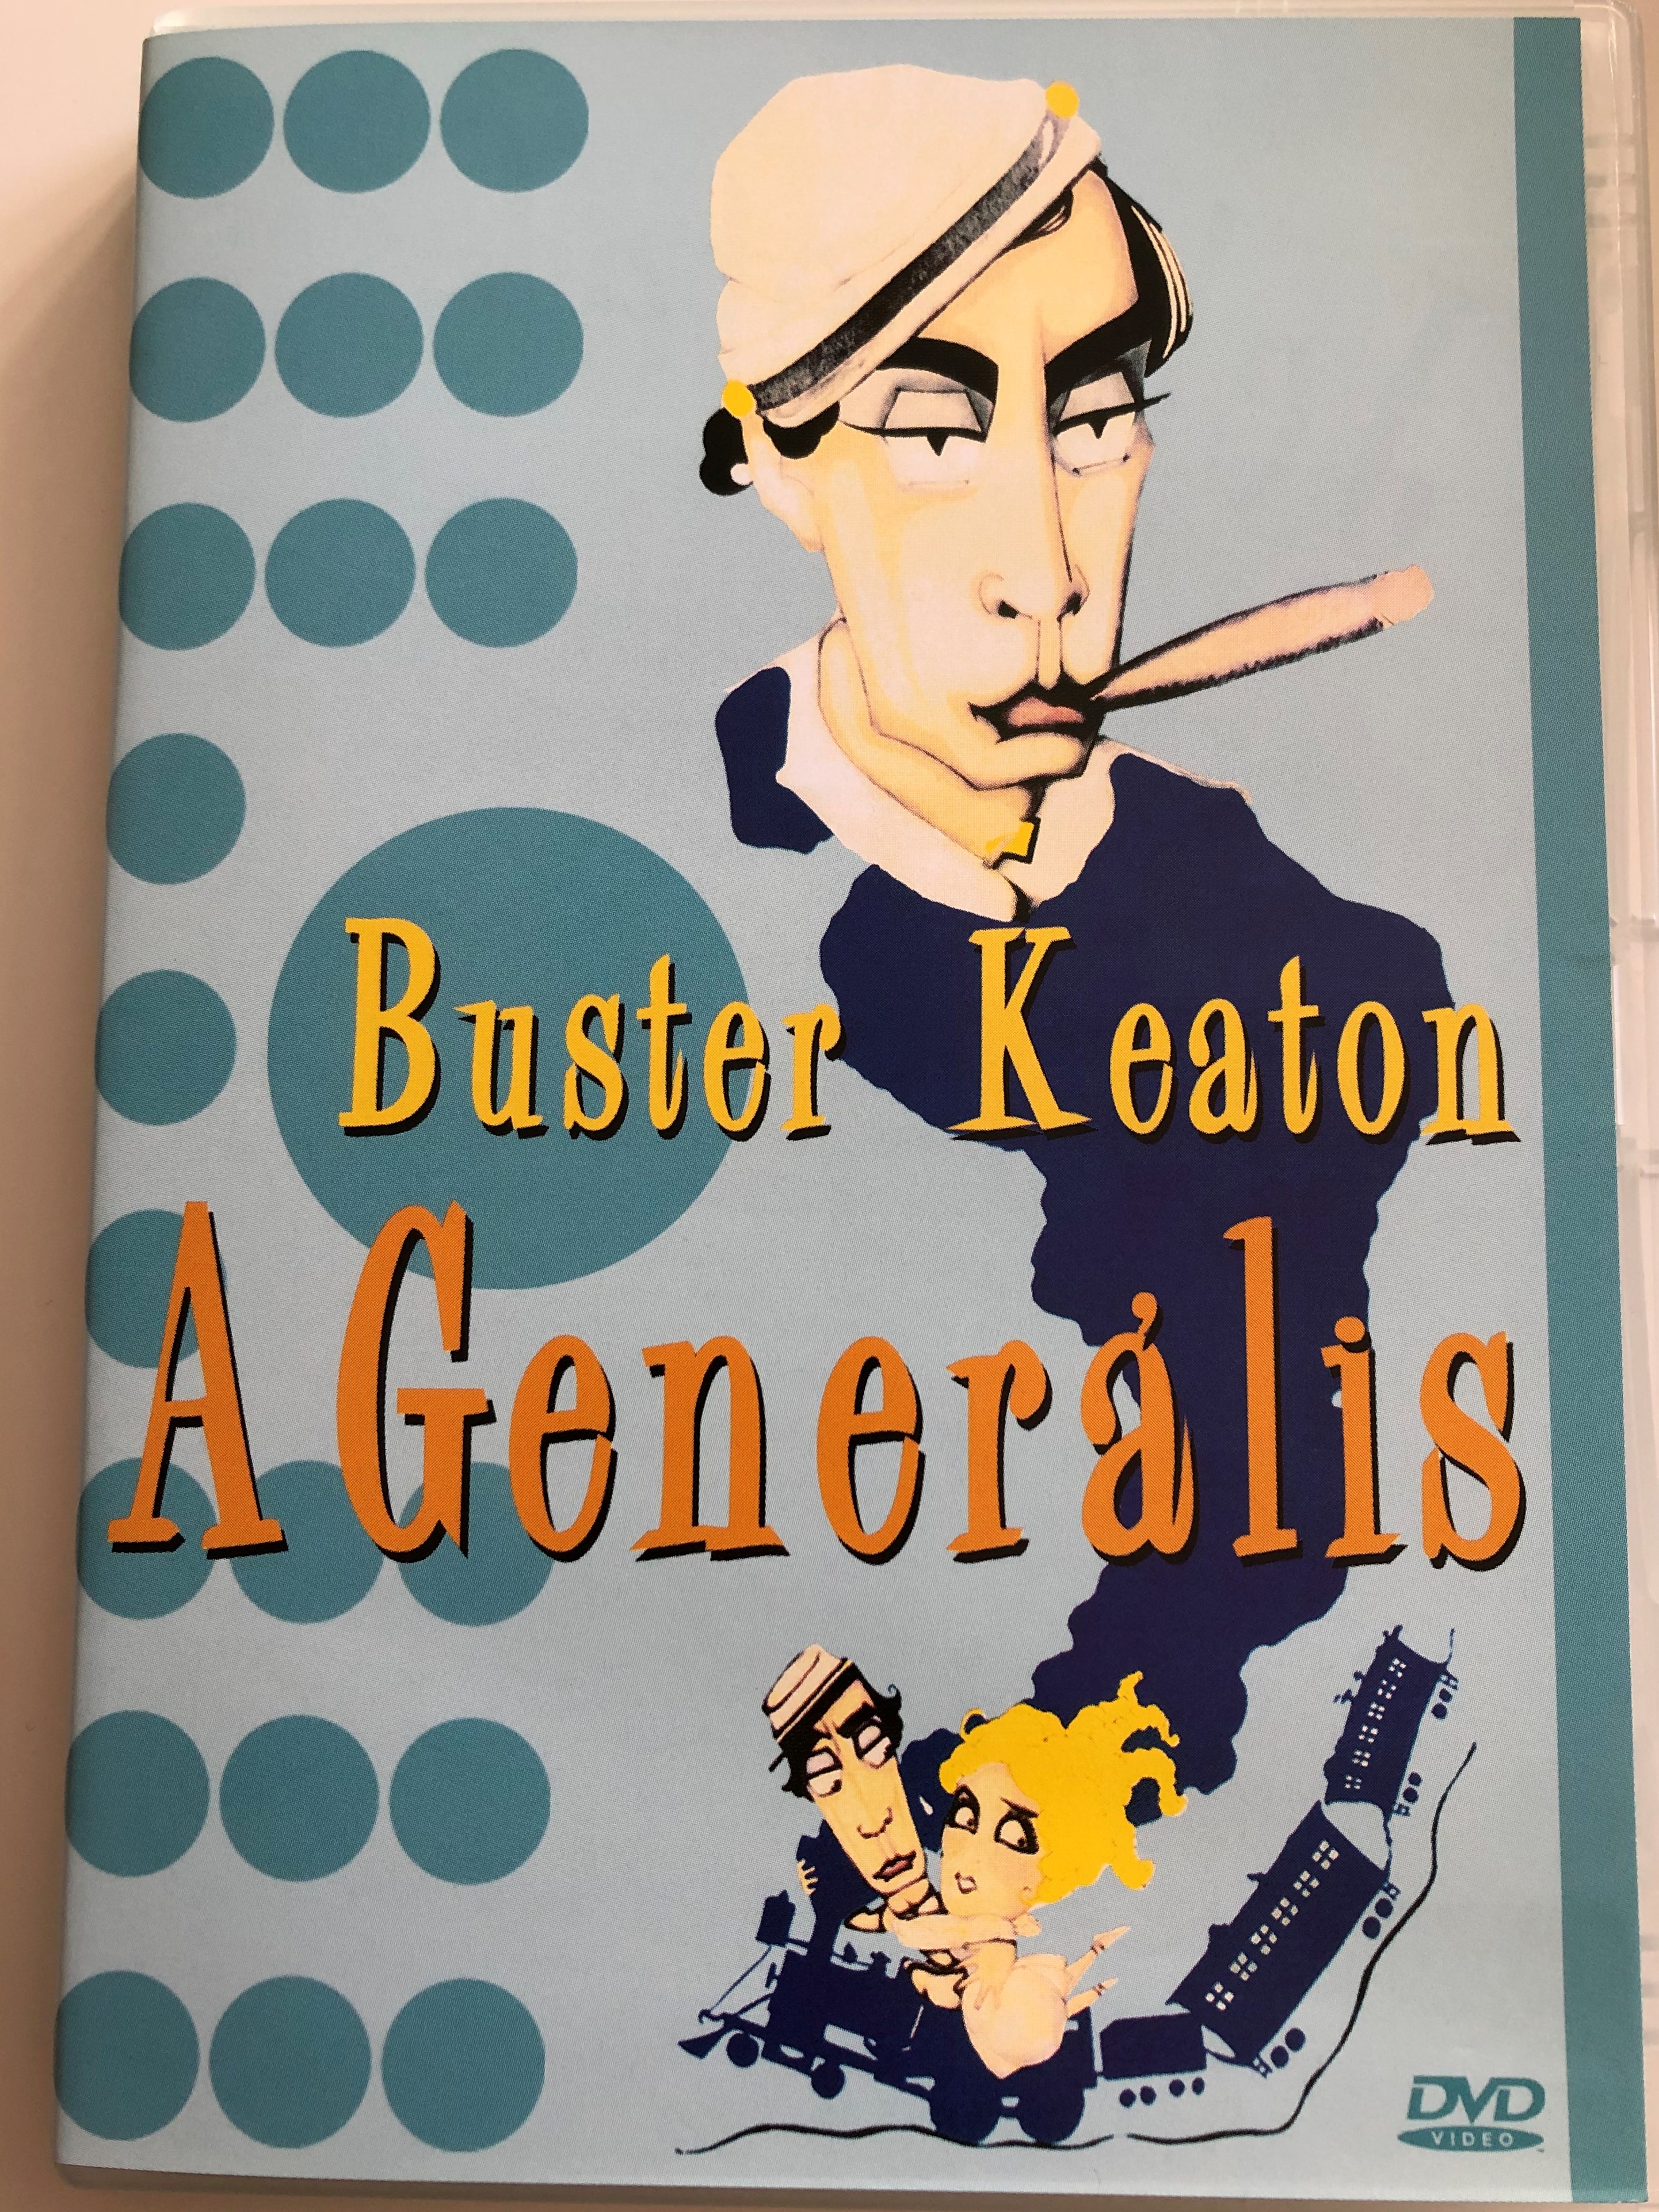 the-general-dvd-1927-a-gener-lis-directed-by-buster-keaton-clyde-bruckman-1-.jpg